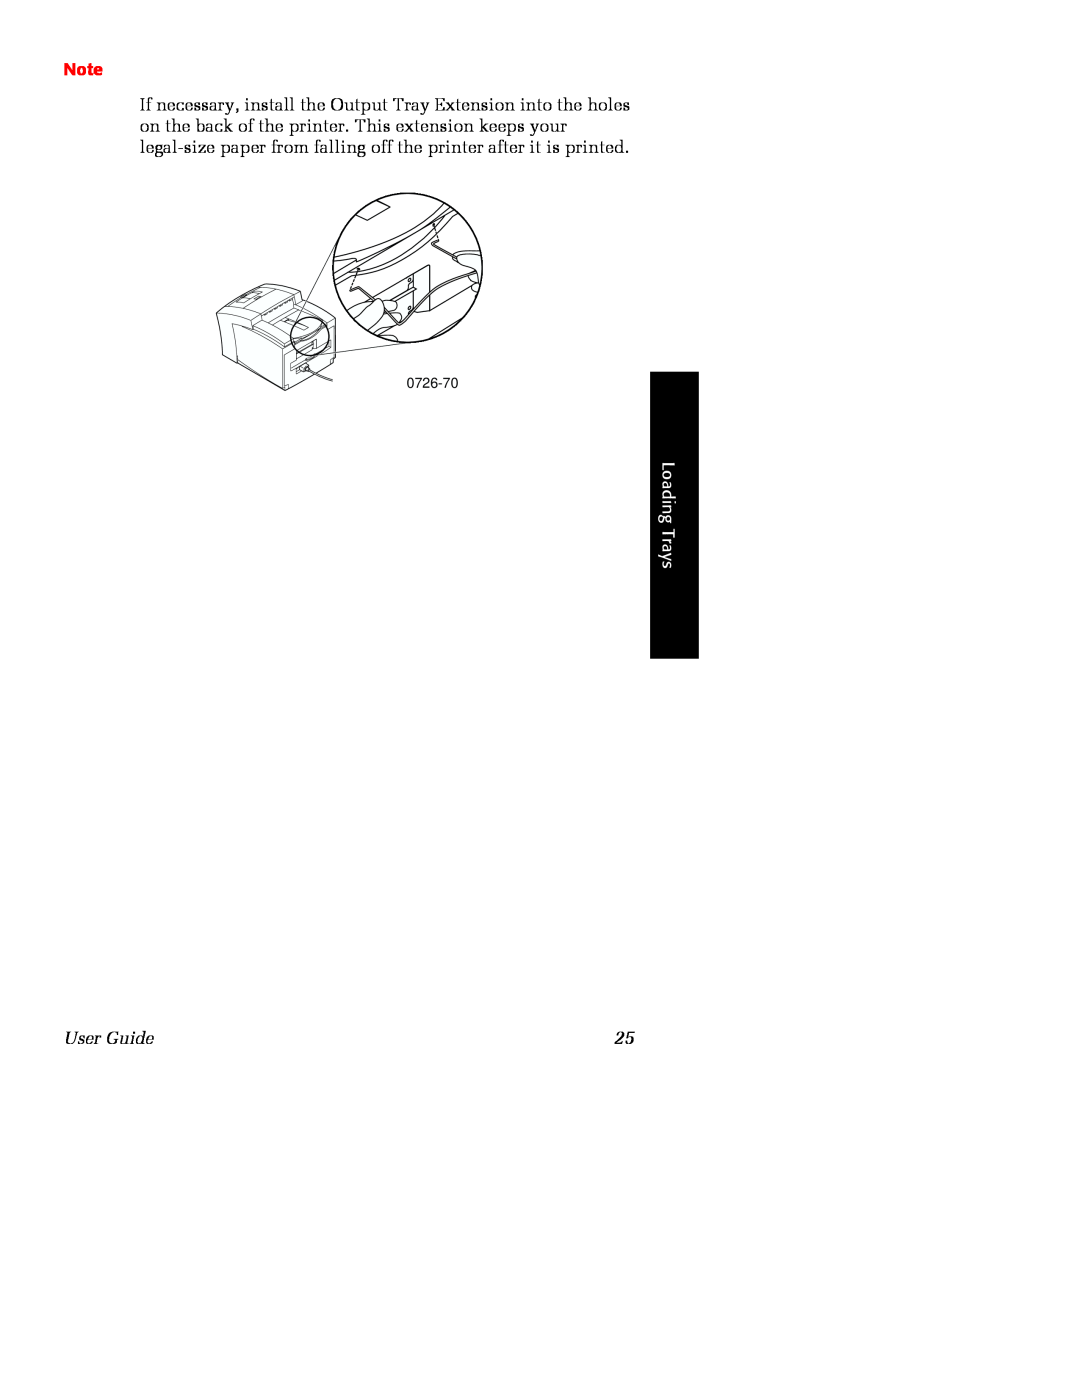 Xerox Phaser 860 manual Loading Trays, User Guide, 0726-70 